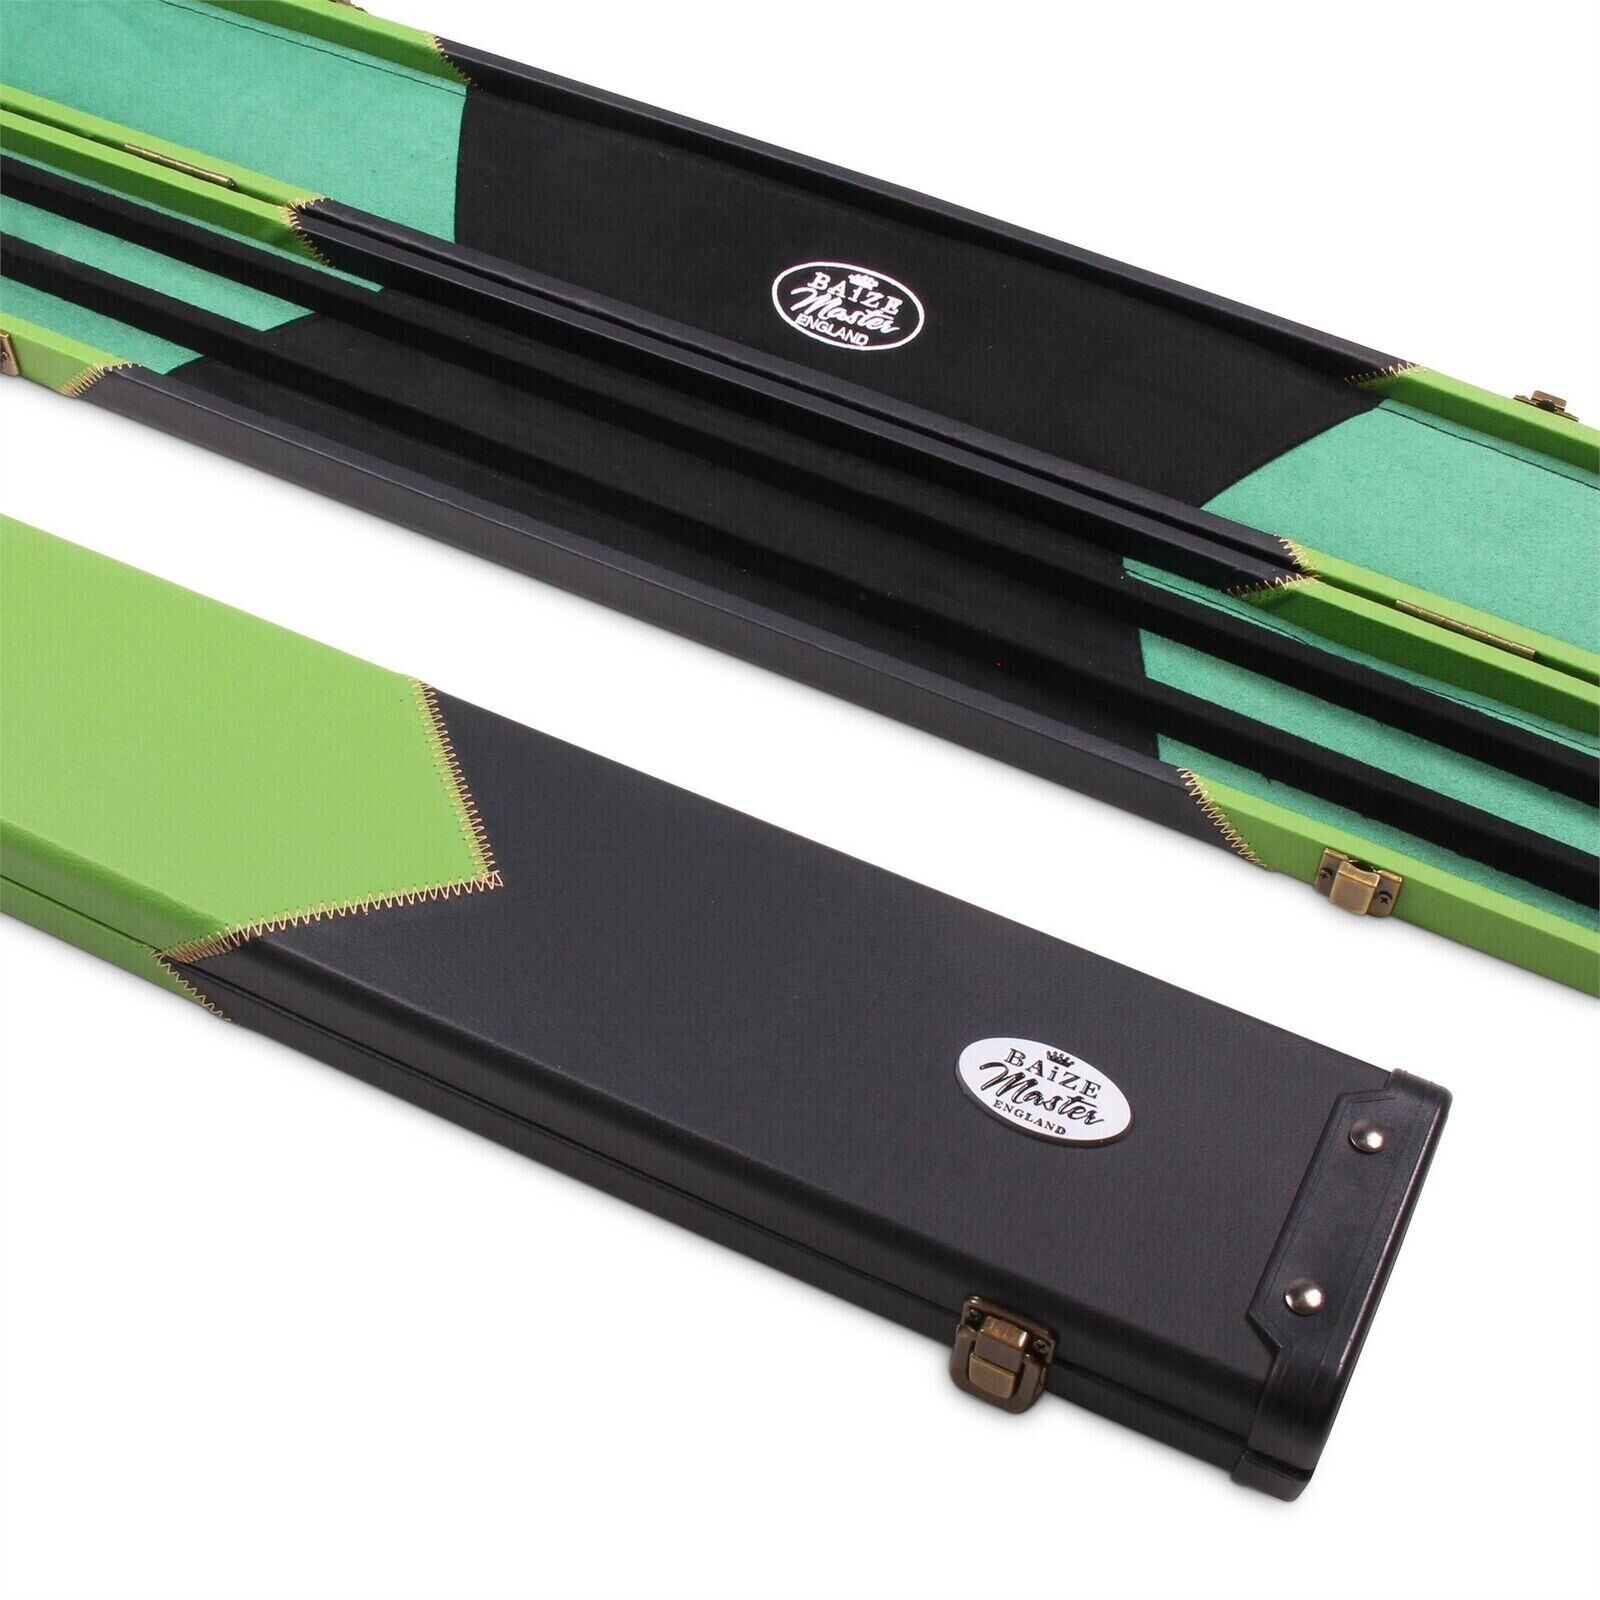 FUNKY CHALK Baize Master 1 Piece WIDE GREEN ARROW Snooker Pool Cue Case - Holds 3 Cues